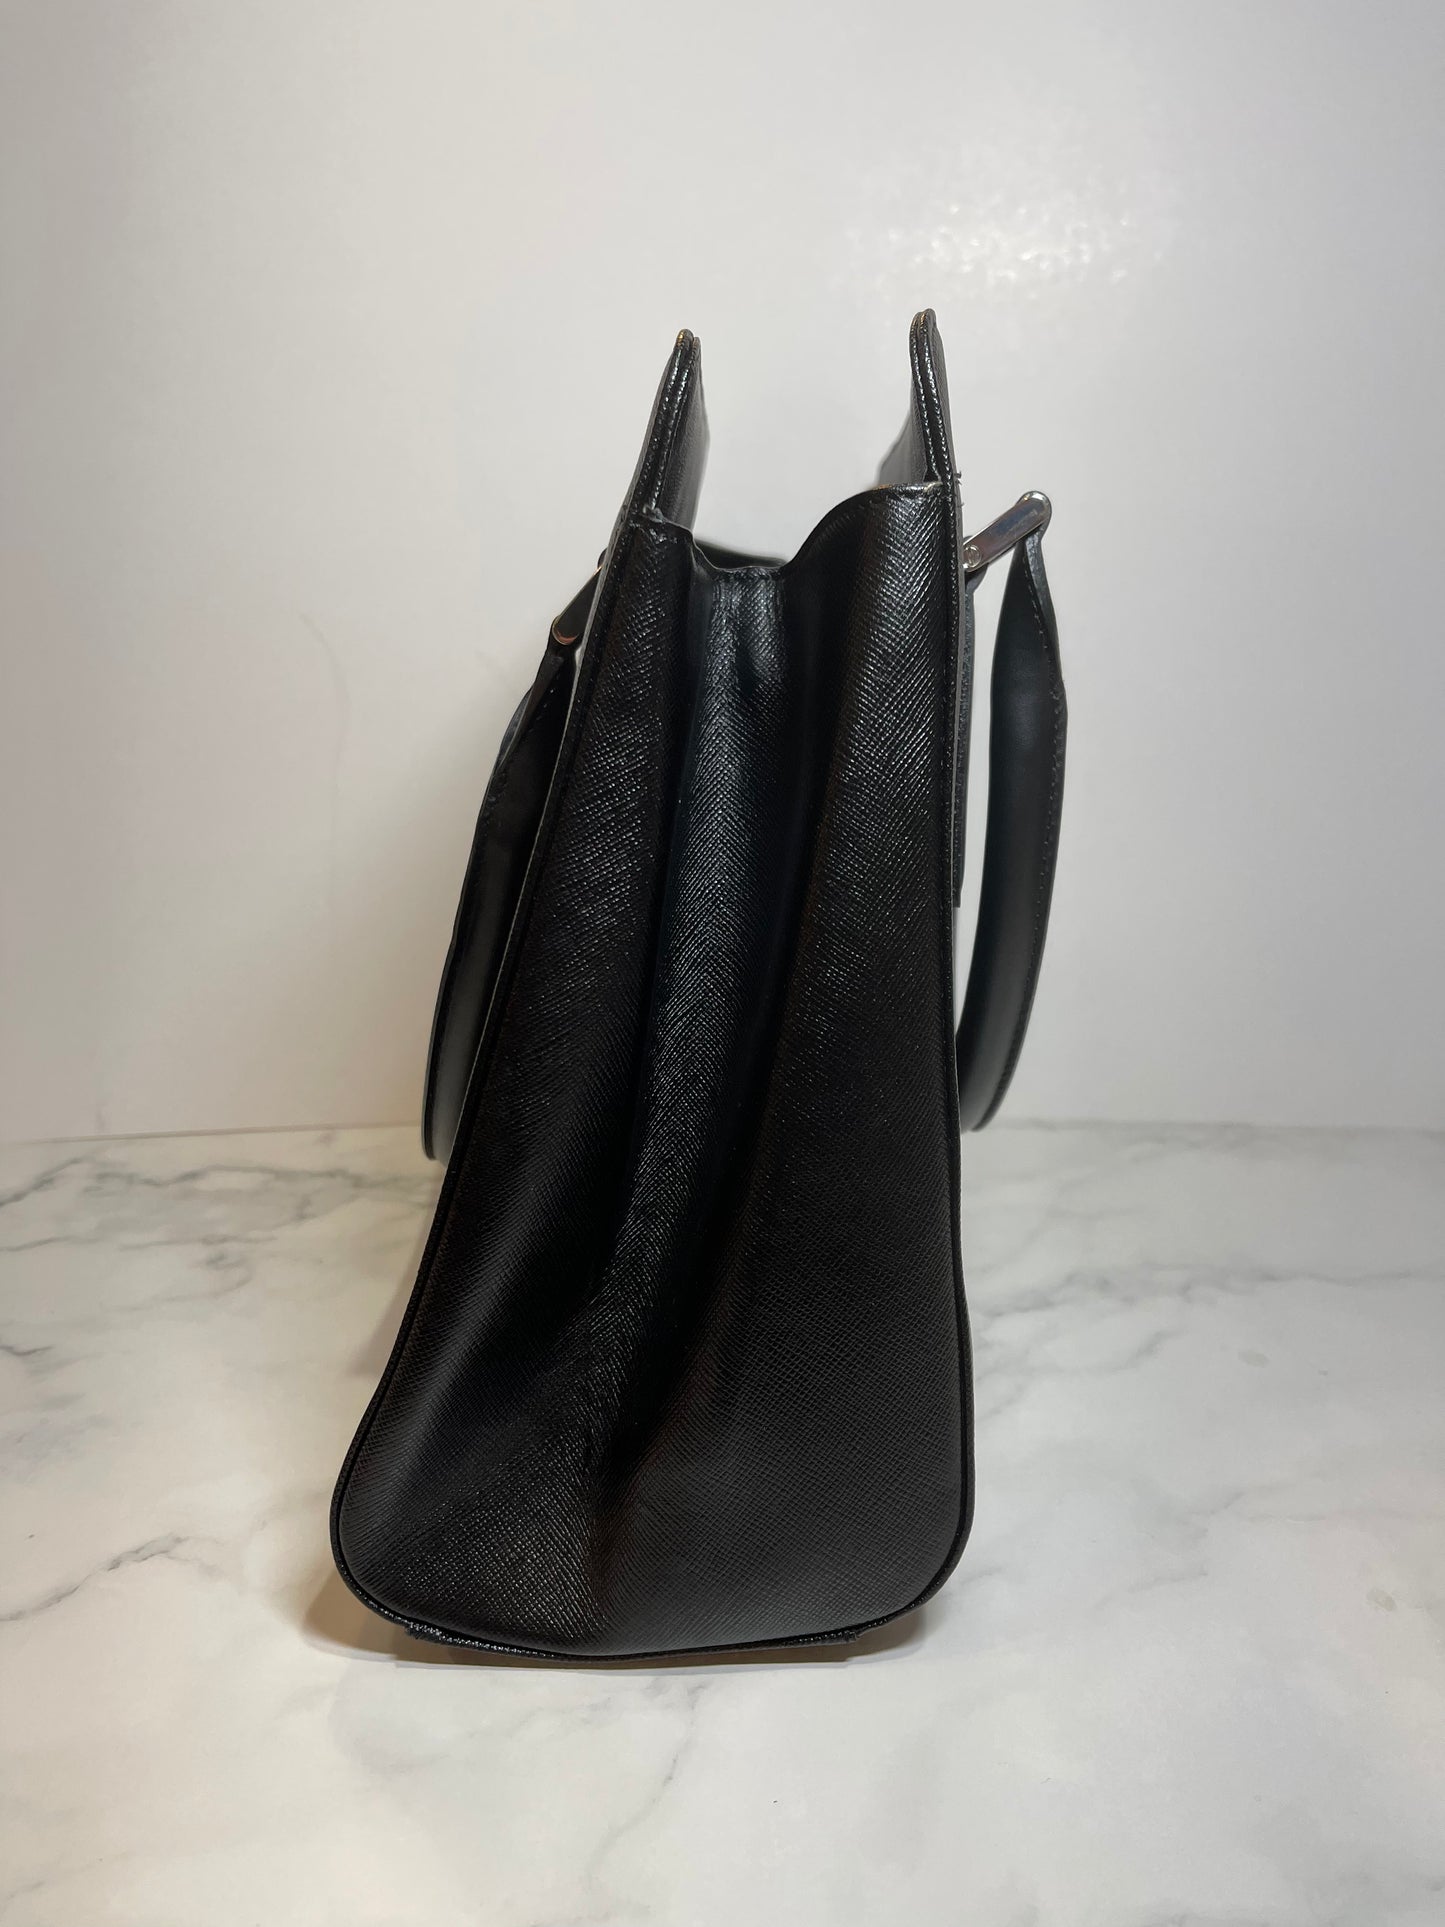 Burberry Black Leather Tote